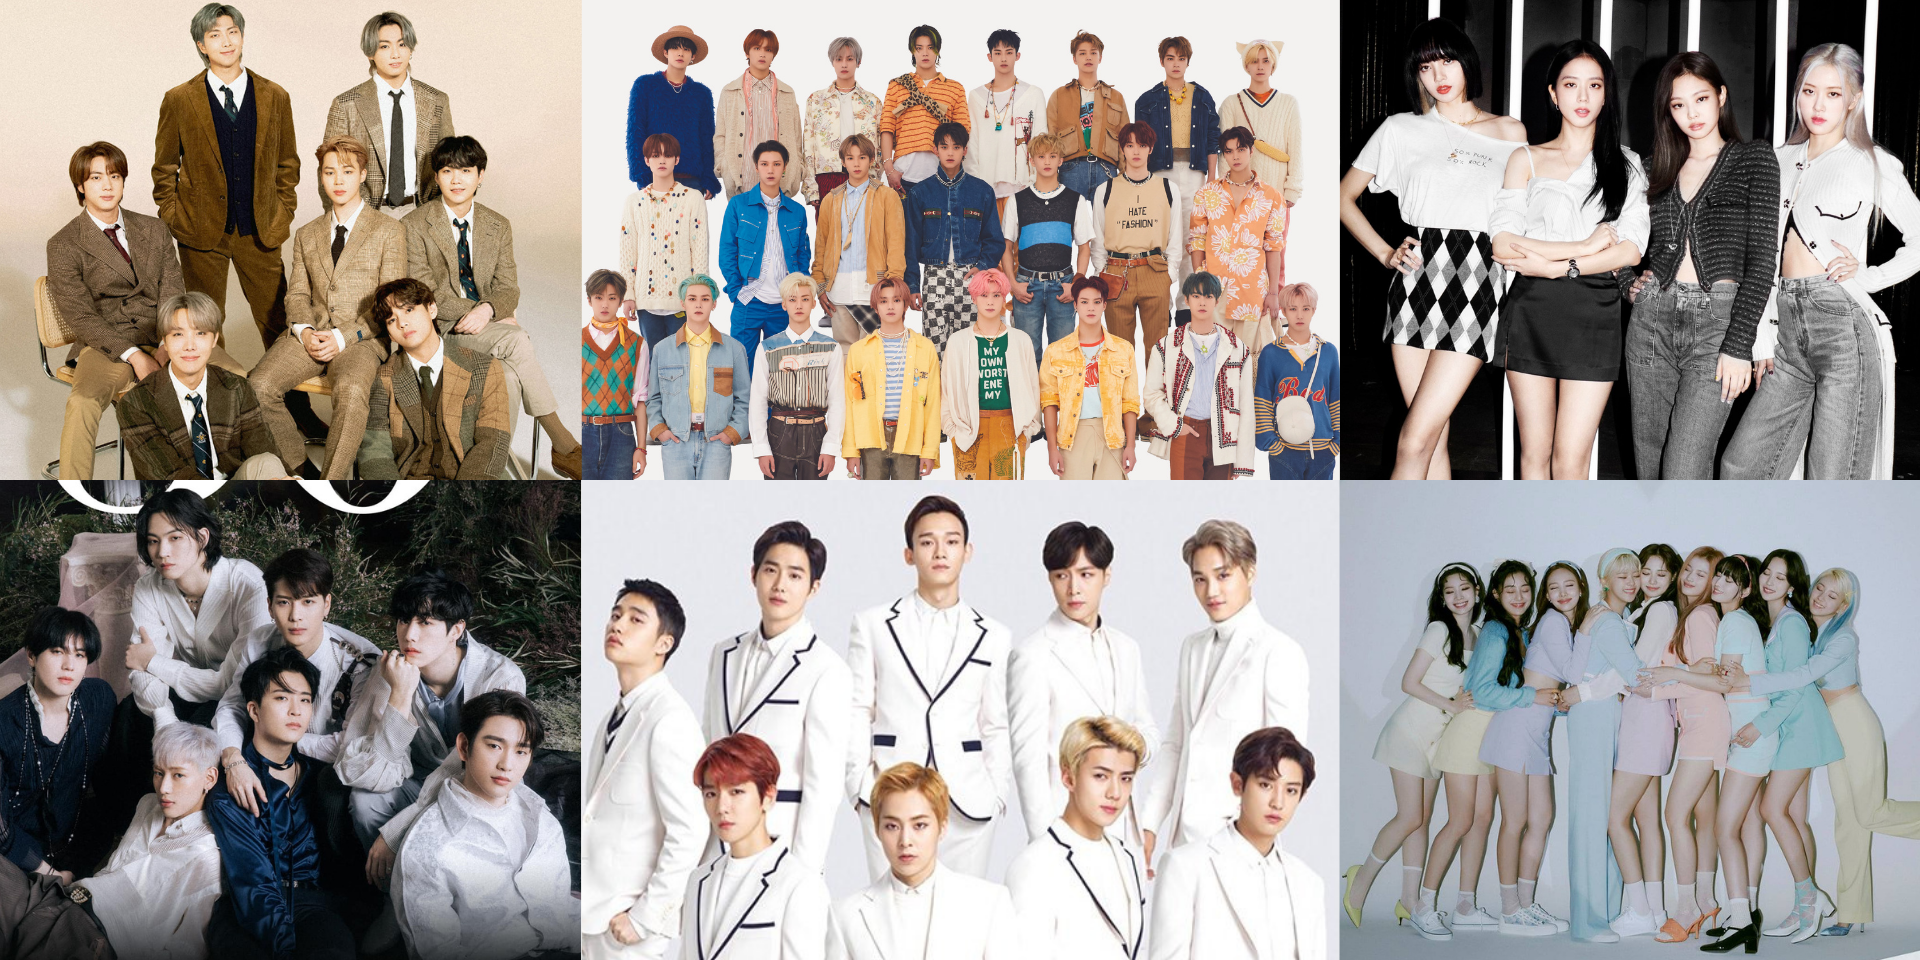 Bandwagon's guide to 3rd generation K-pop idols – BTS, BLACKPINK, EXO, NCT, TWICE, GOT7, and more